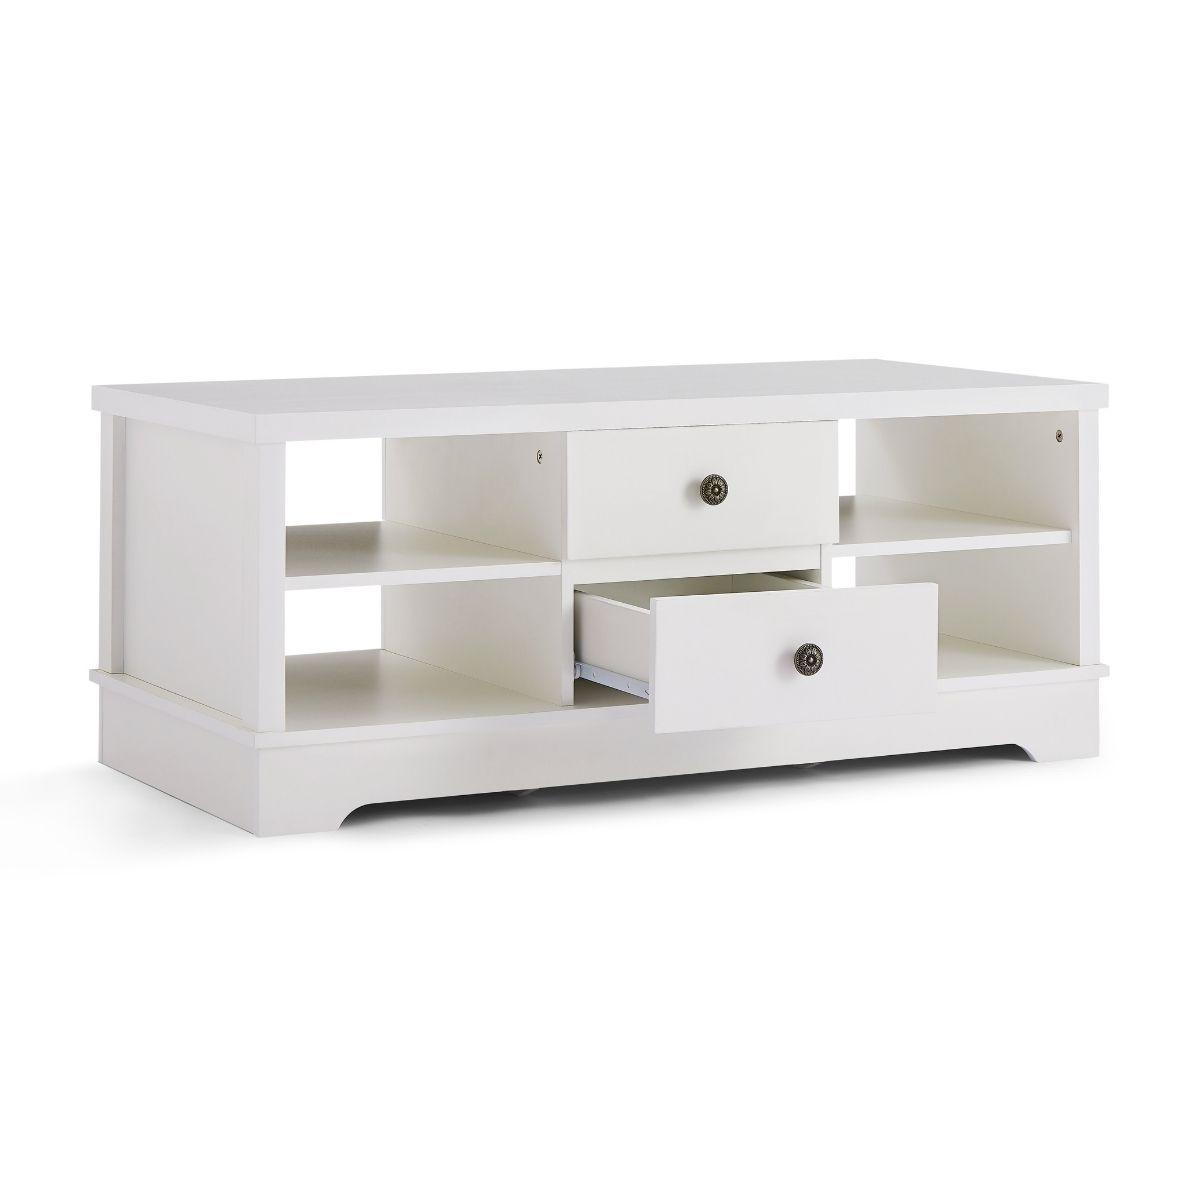 Margaux White Coastal Style Coffee Table with Drawers